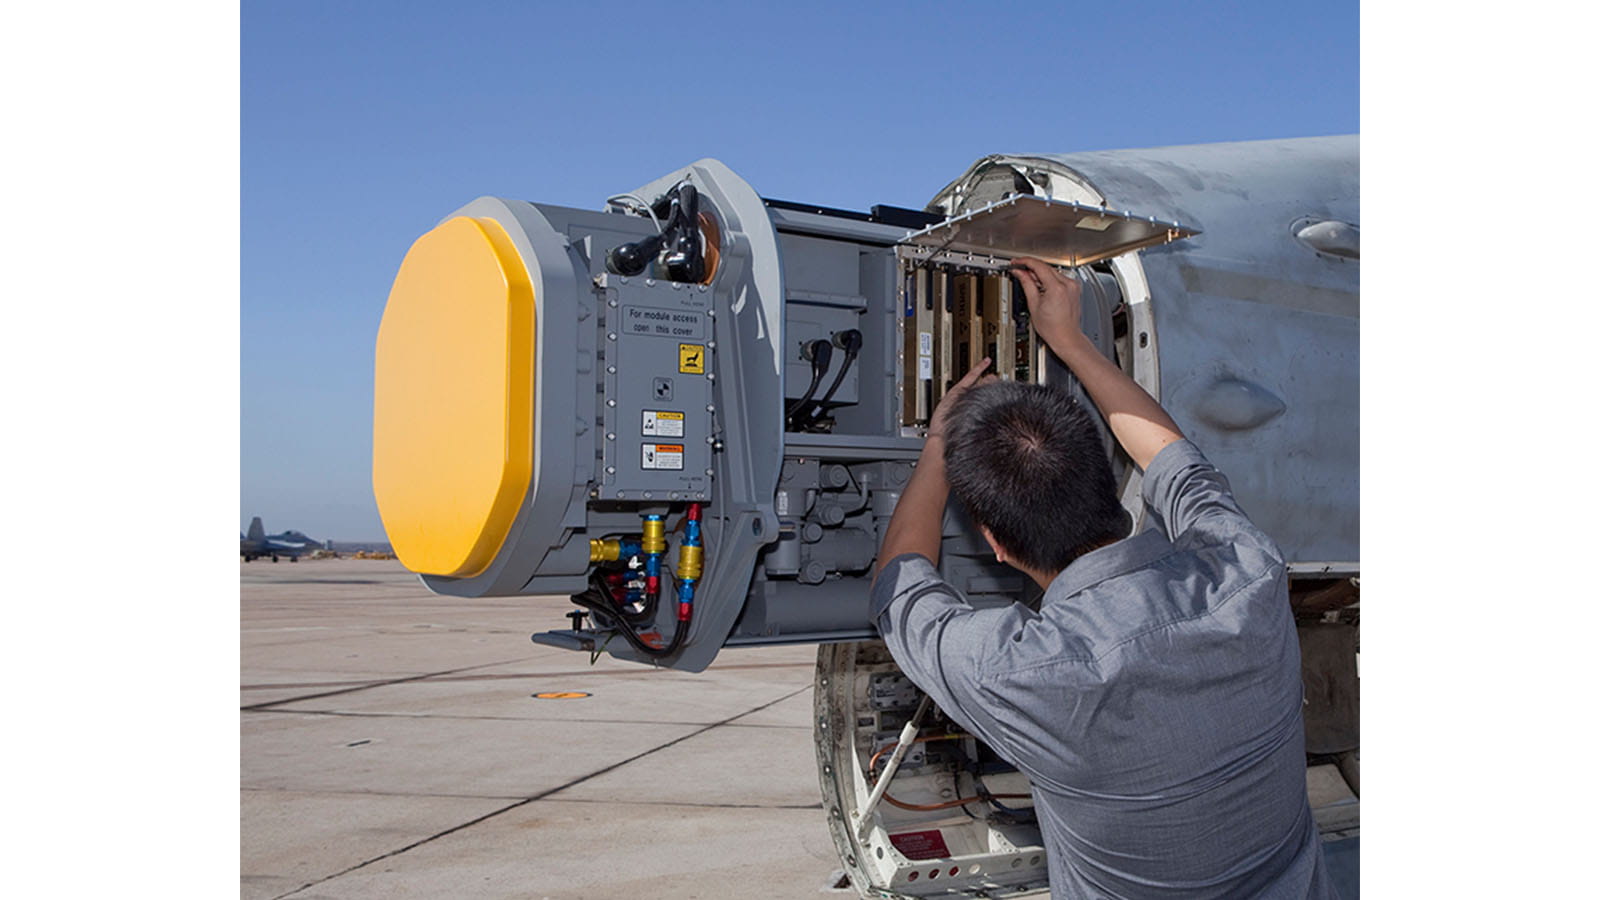 The APG-79(V)X features the same modular, scalable form factor as the APG-84 tailored for the F/A-18.